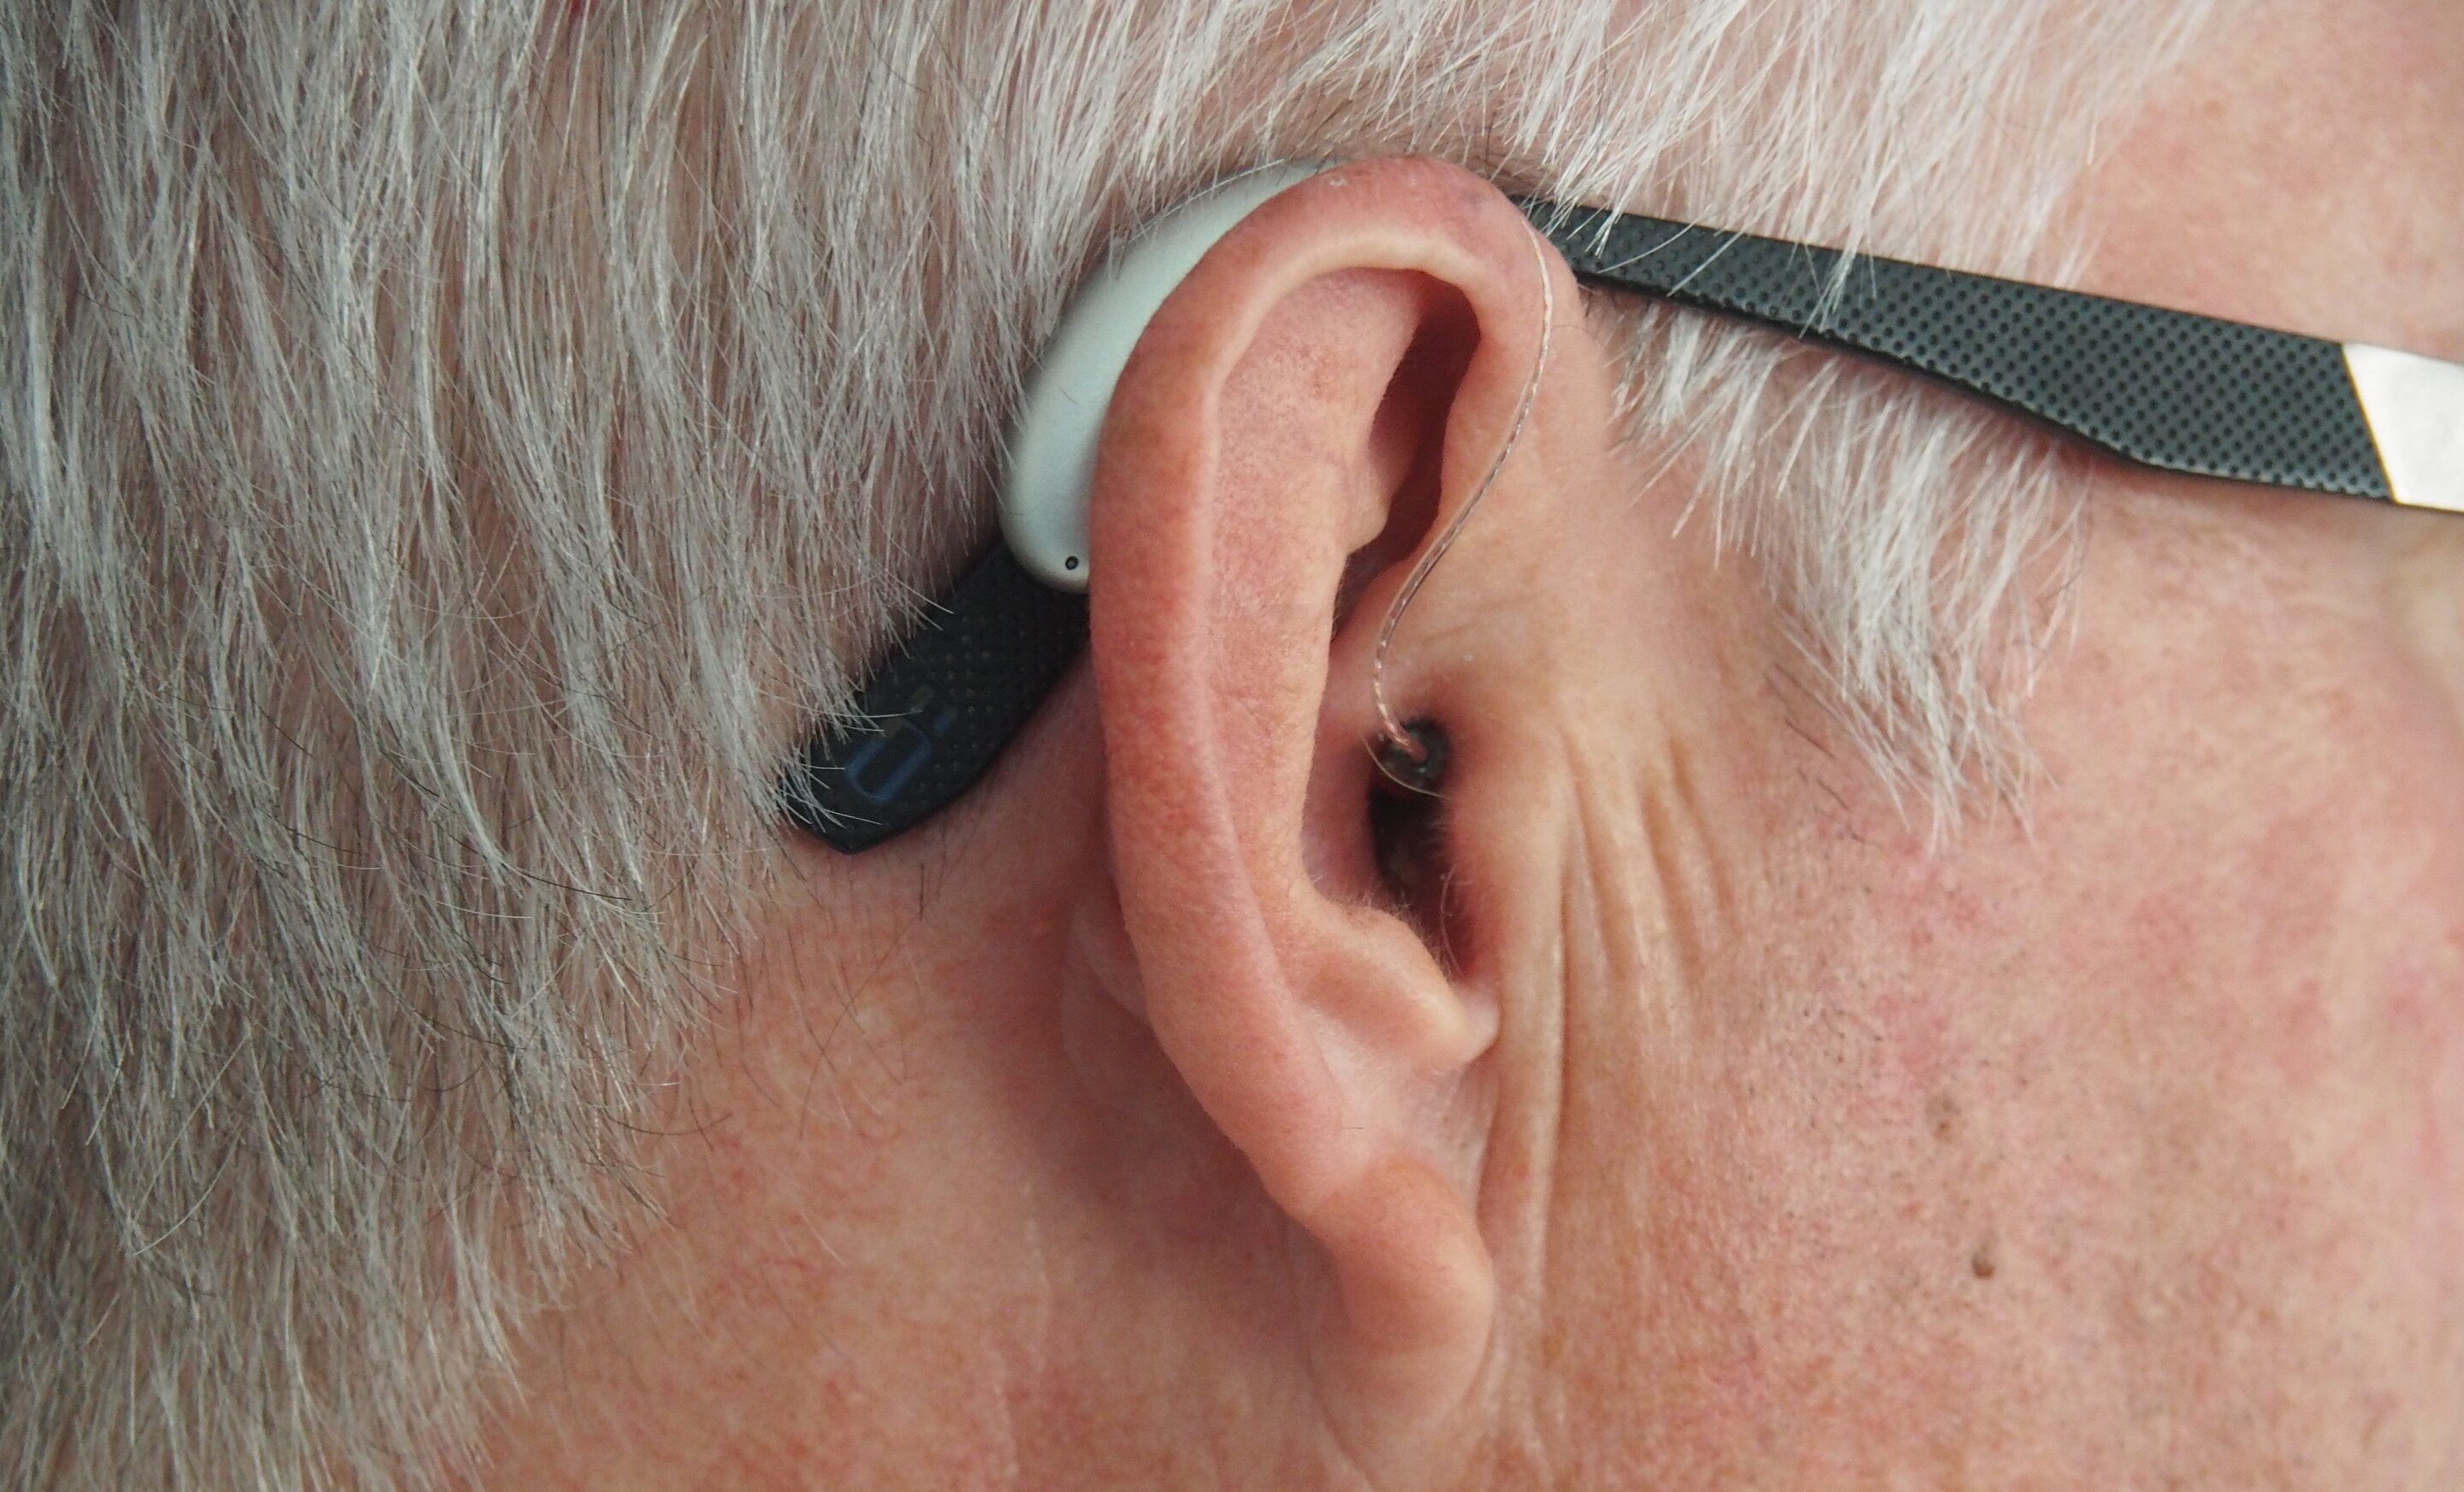 Consumers Should Be Aware of Drawbacks of Over-the-Counter Hearing